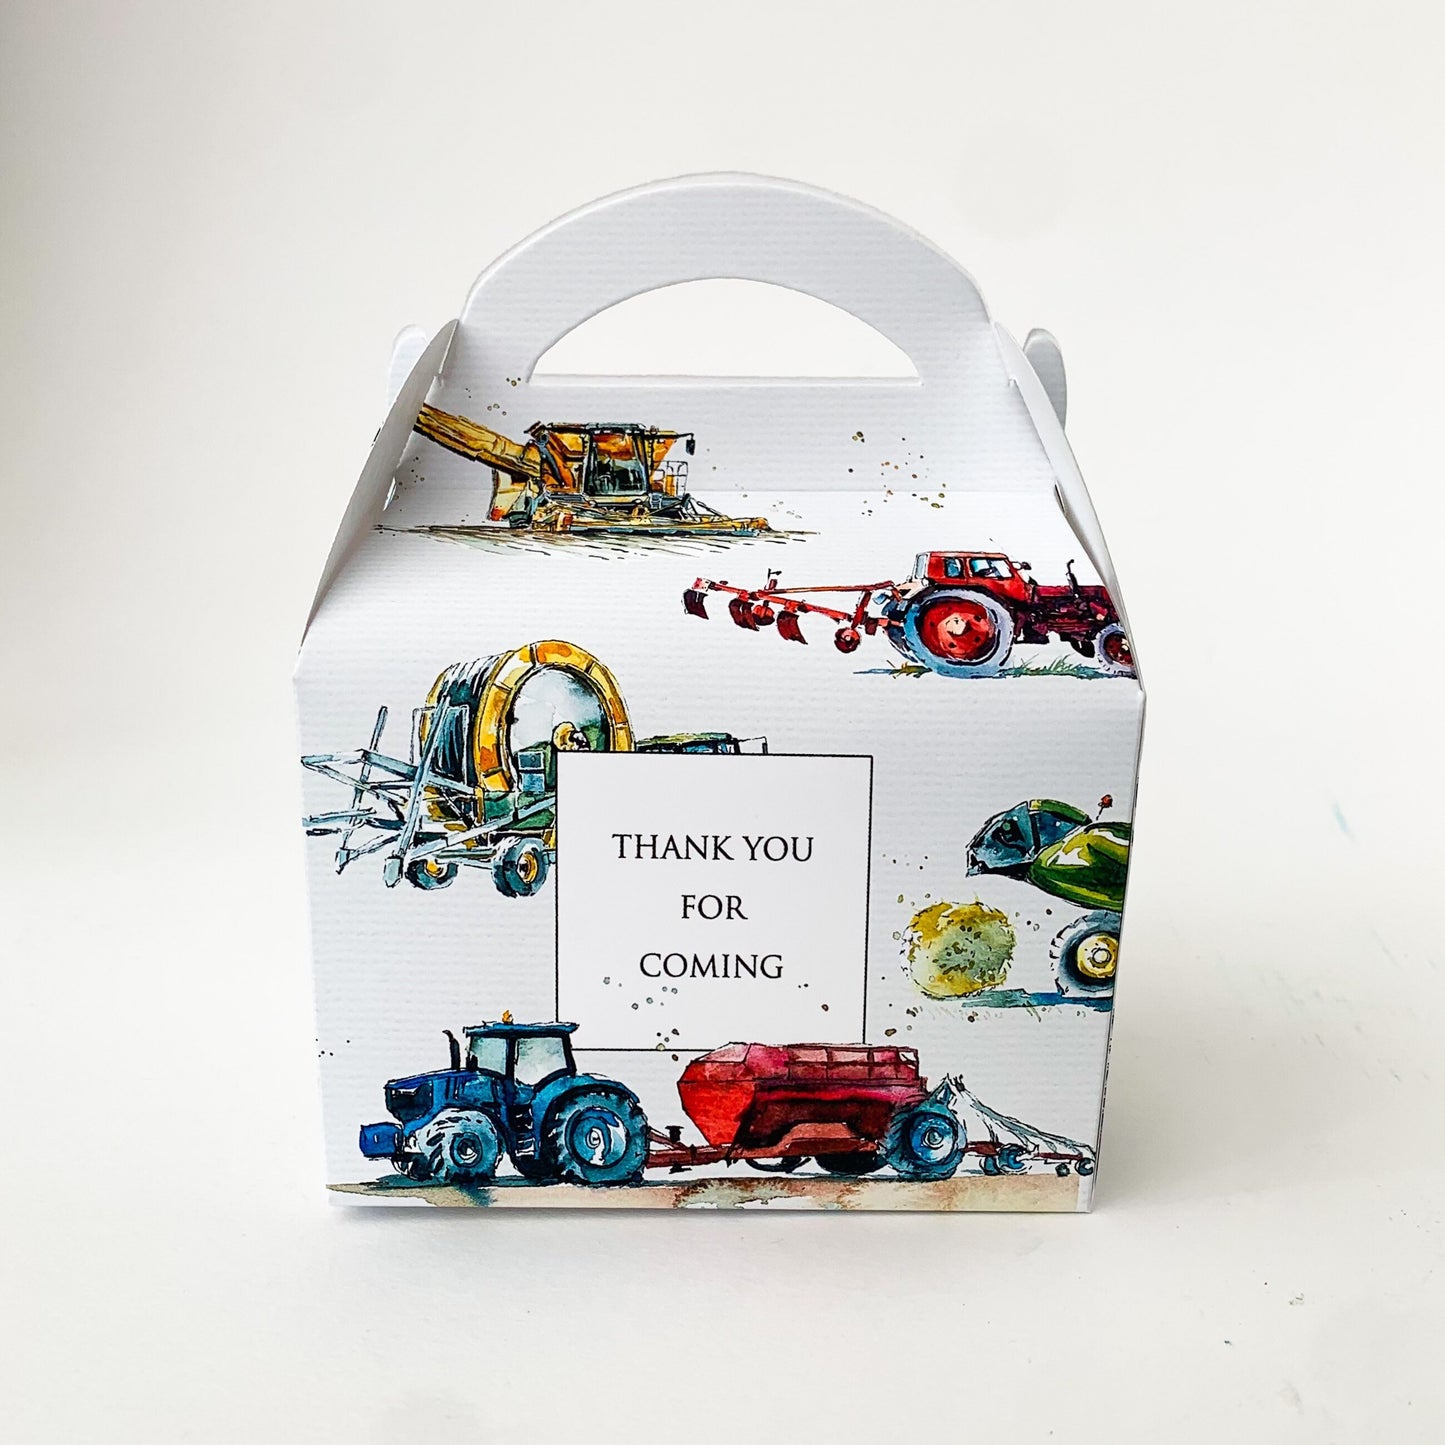 Tractor farming machinery and equipment Personalised Children’s Party Box Gift Bag Favour